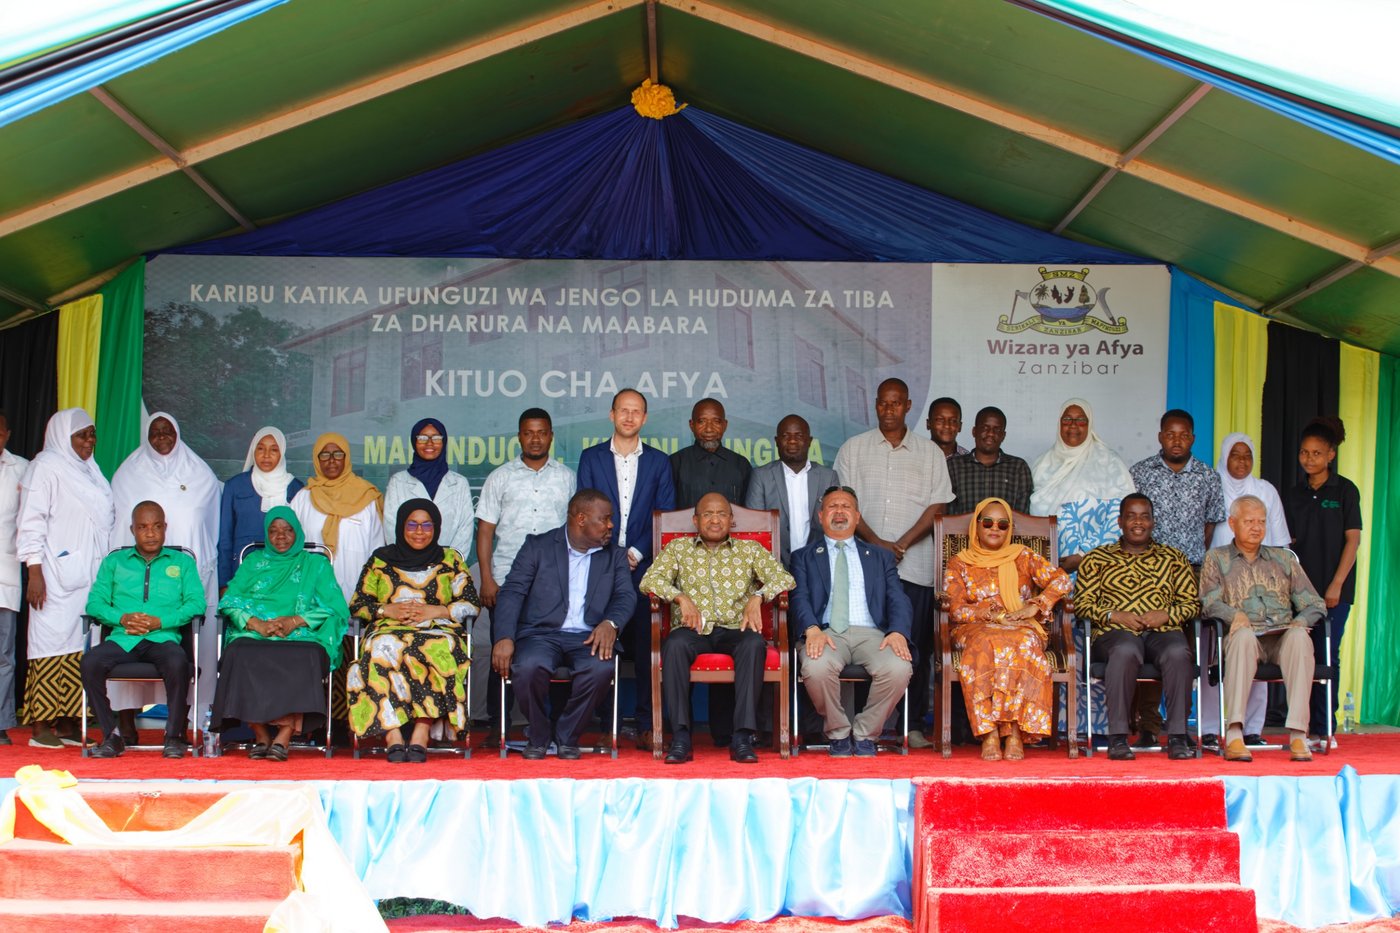 group of leaders from the island of Zanzibar in Tanzania on the opening day of the new laboratory